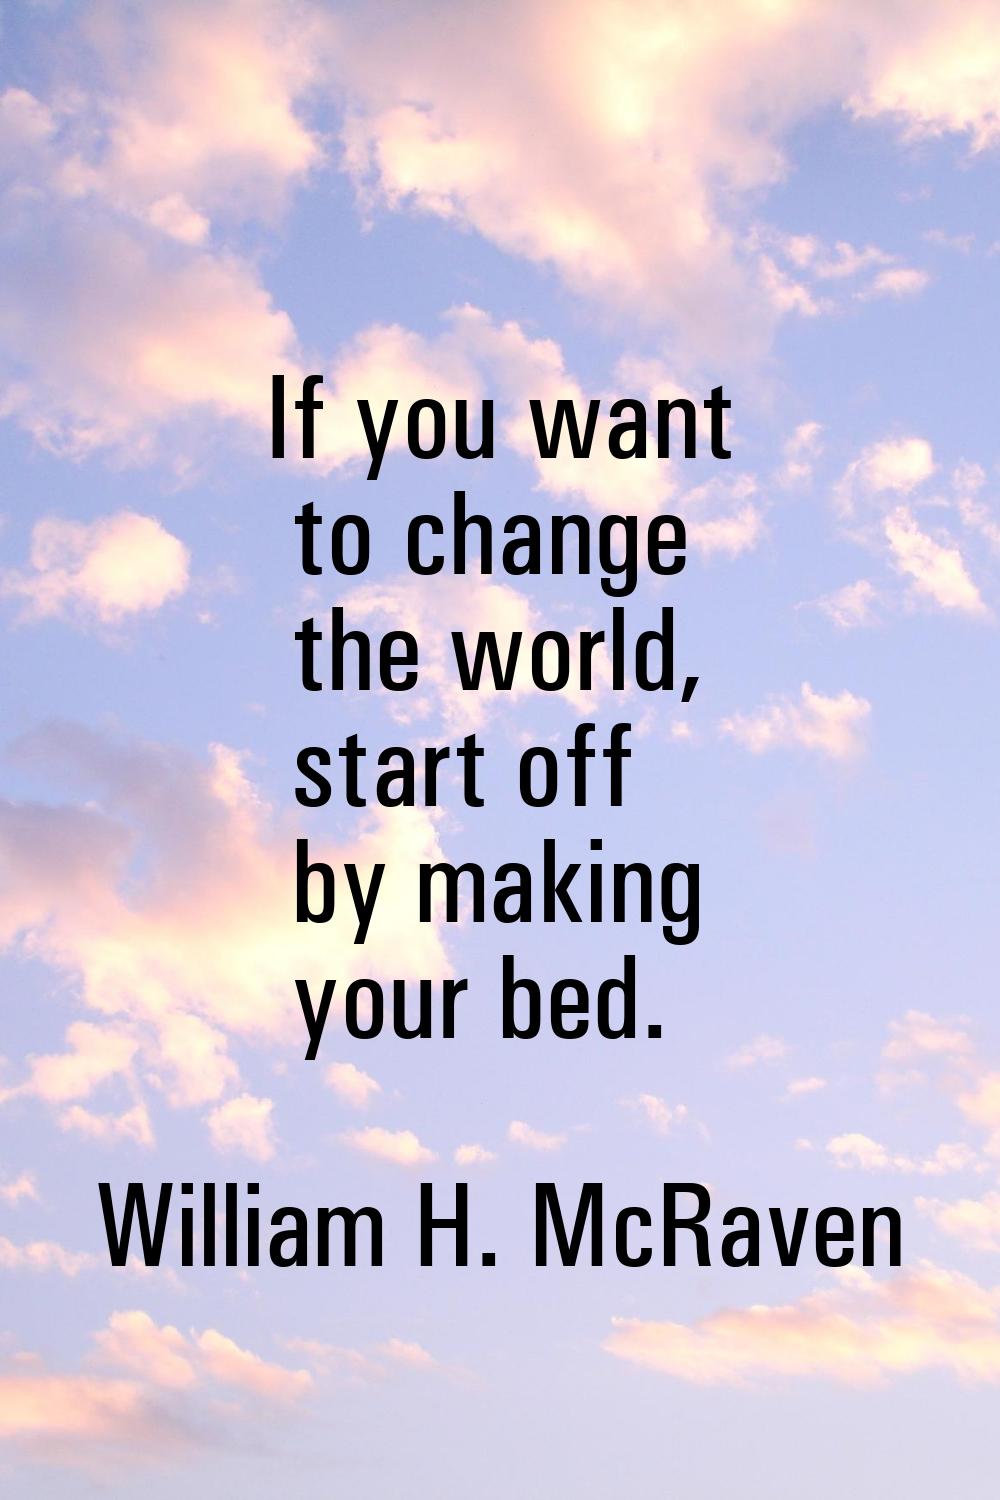 If you want to change the world, start off by making your bed.